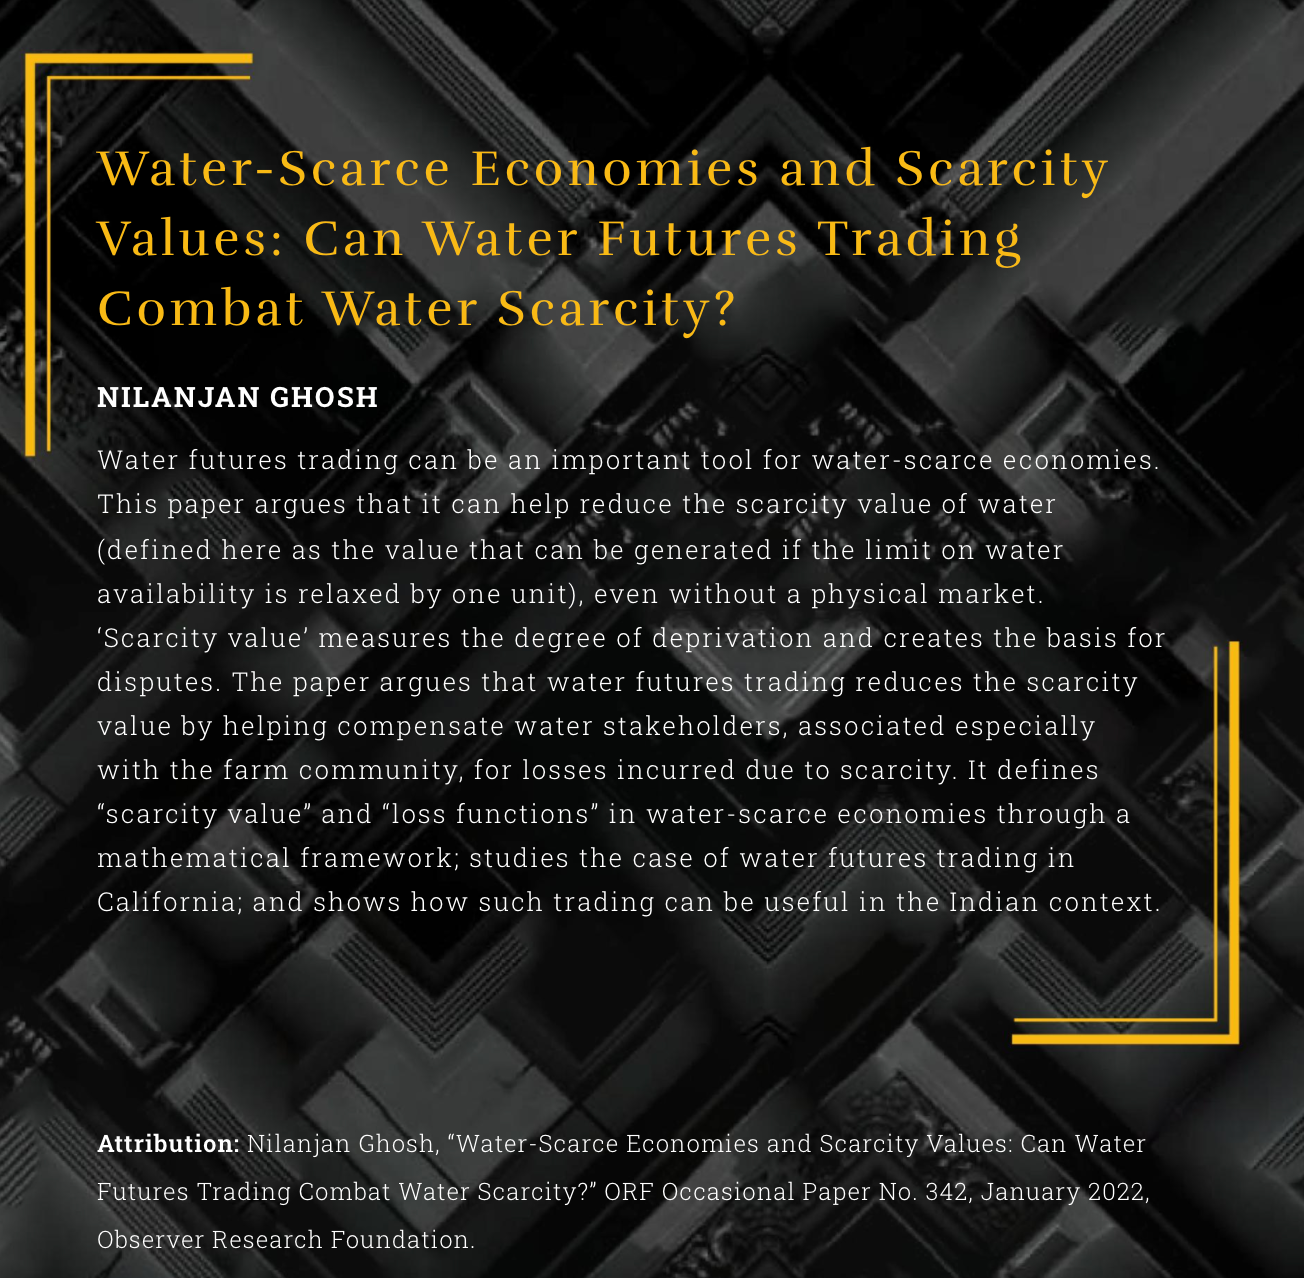 Water-Scarce Economies and Scarcity Values: Can Water Futures Trading Combat Water Scarcity?